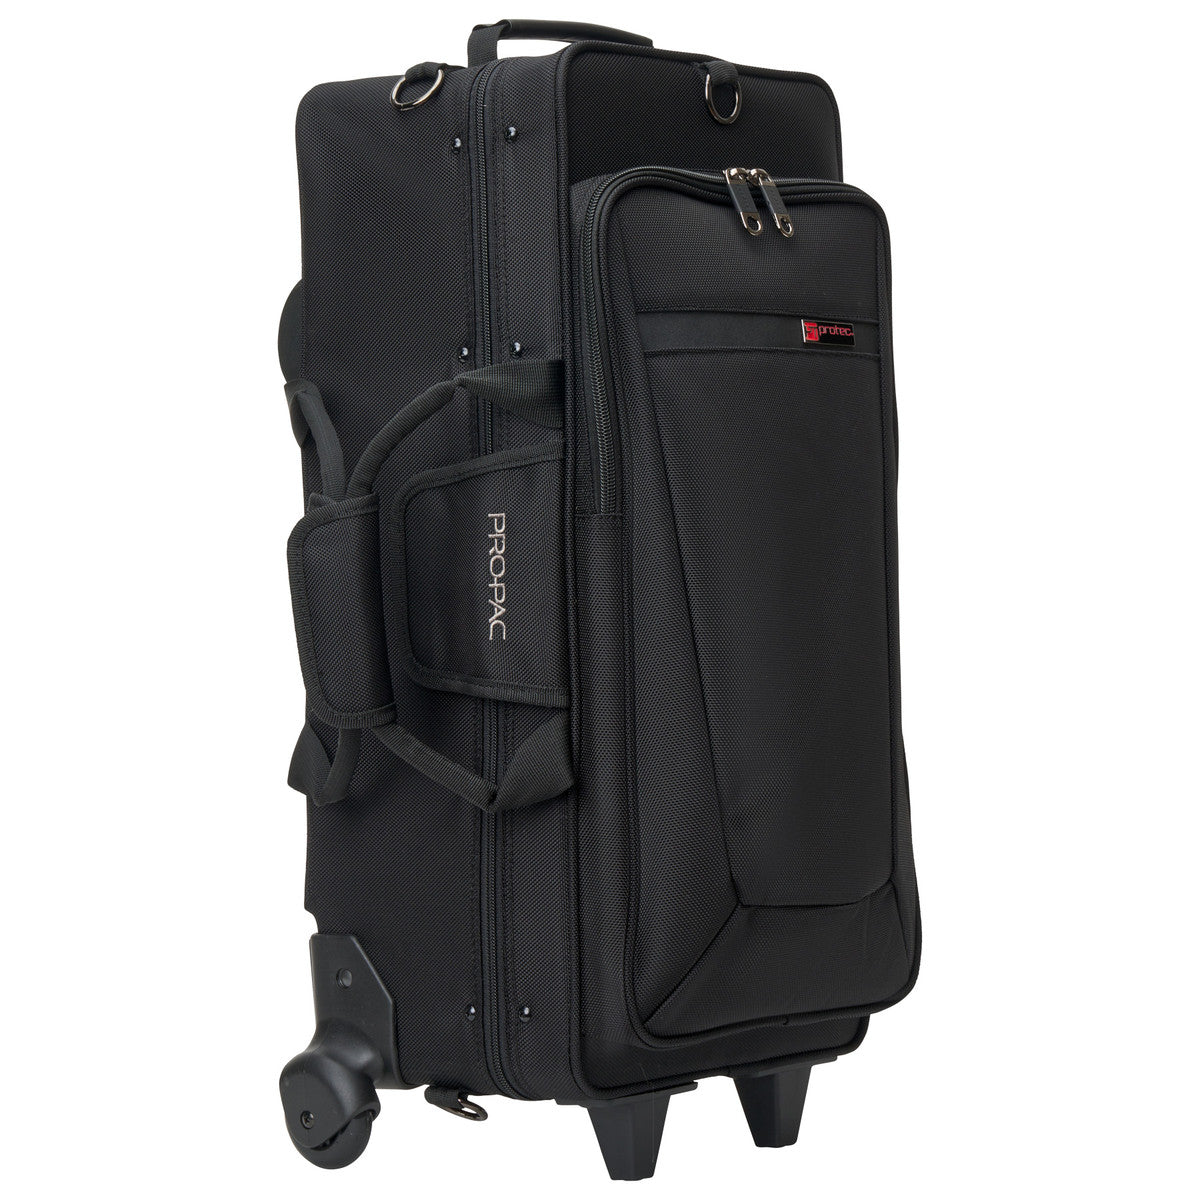 Protec I-Pac double trumpet case with wheels